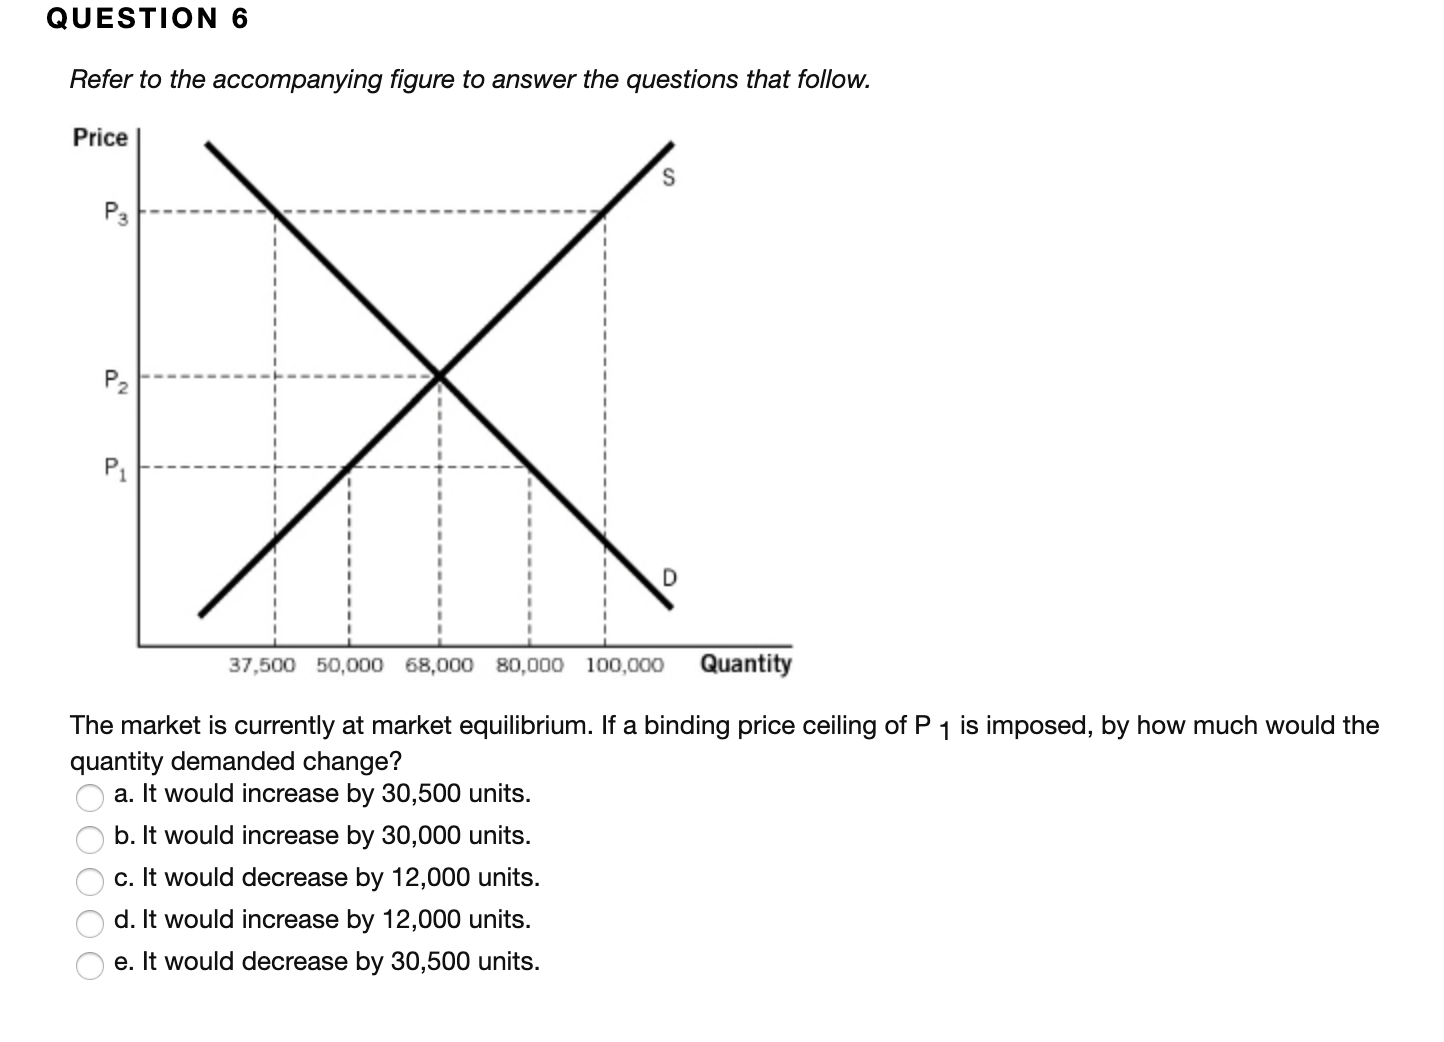 QUESTION 6
Refer to the accompanying figure to answer the questions that follow.
Price
P3
P2
P1
Quantity
37,500 50,000 68,000 80,000 100,000
The market is currently at market equilibrium. If a binding price ceiling of P 1 is imposed, by how much would the
quantity demanded change?
a. It would increase by 30,500 units.
b. It would increase by 30,000 units.
c. It would decrease by 12,000 units.
d. It would increase by 12,000 units.
e. It would decrease by 30,500 units.
OOOO
